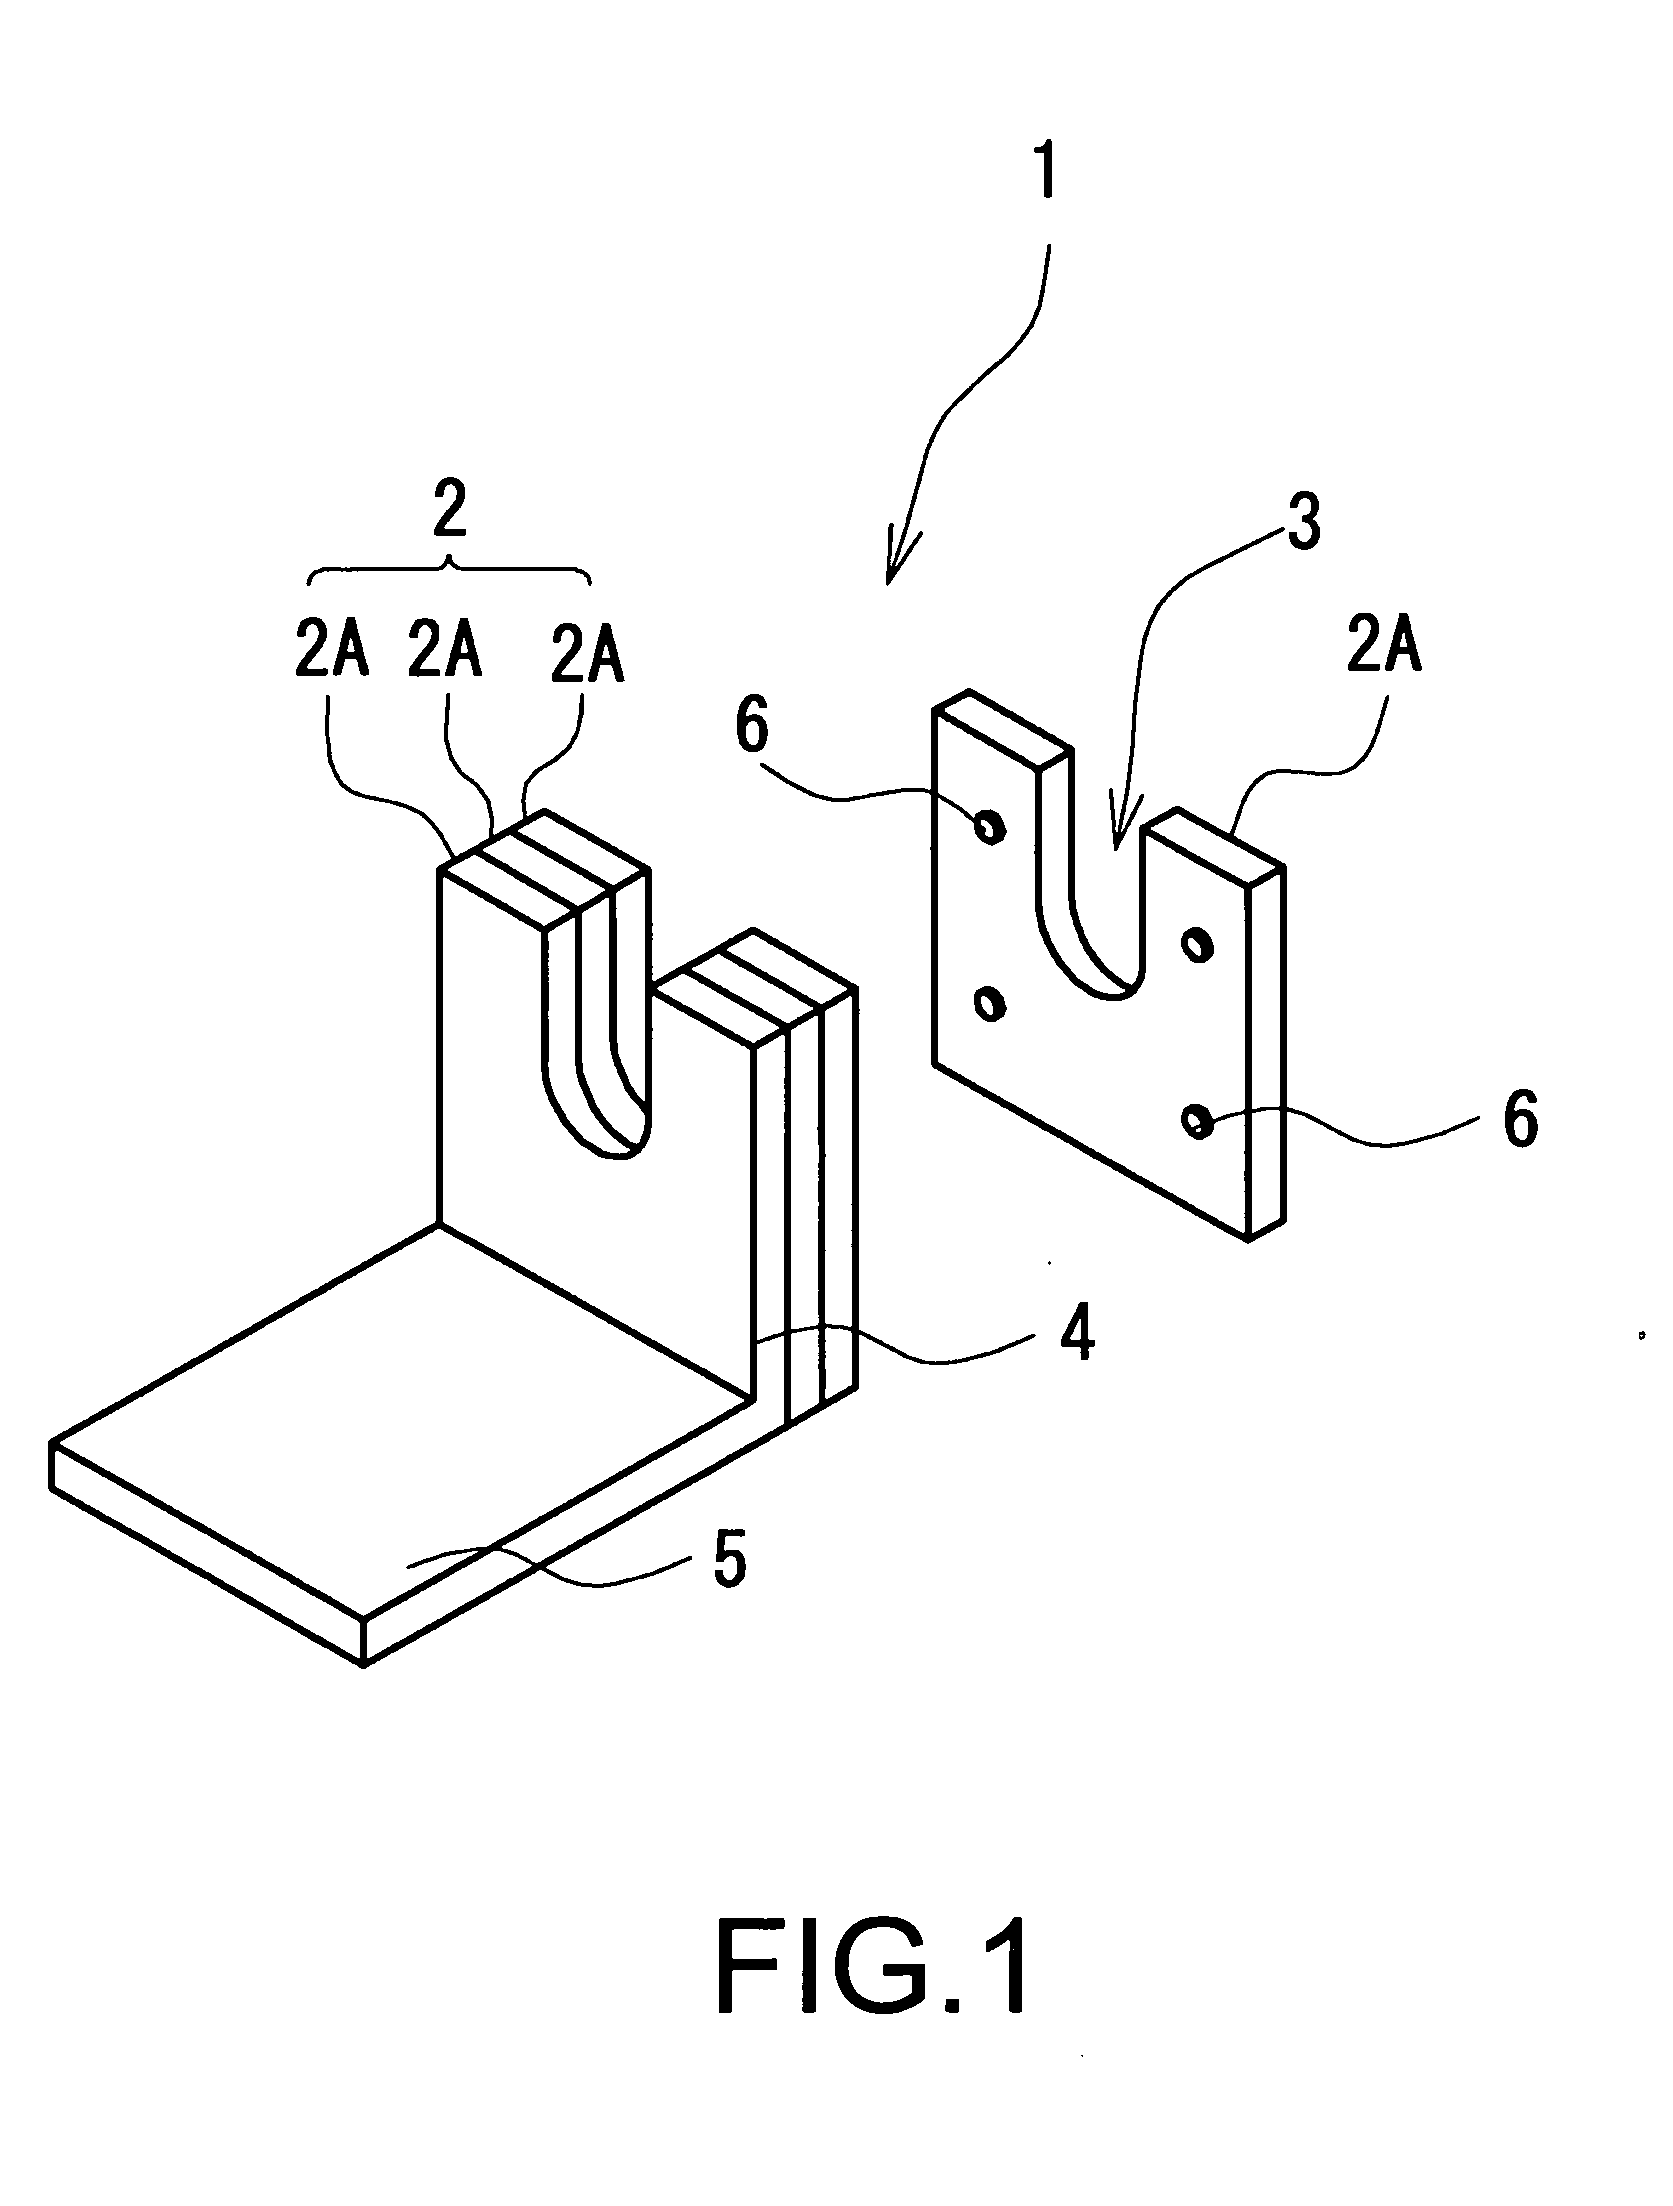 Unit-matching assisting tool for quantitative injection of medicine and method for adjusting injection rate of medicine